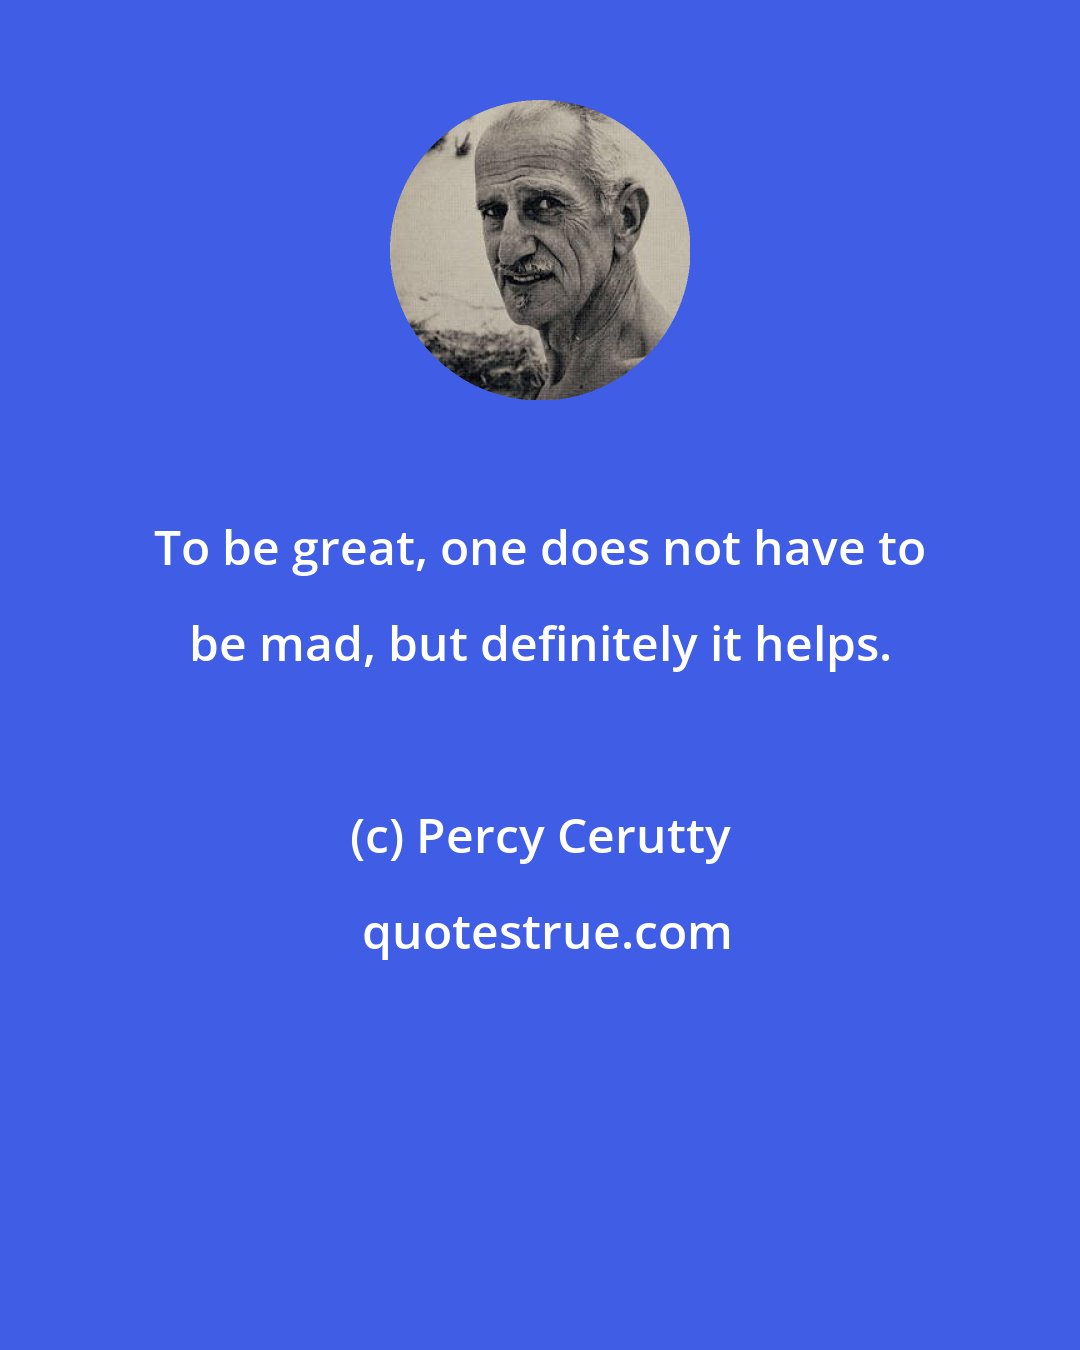 Percy Cerutty: To be great, one does not have to be mad, but definitely it helps.